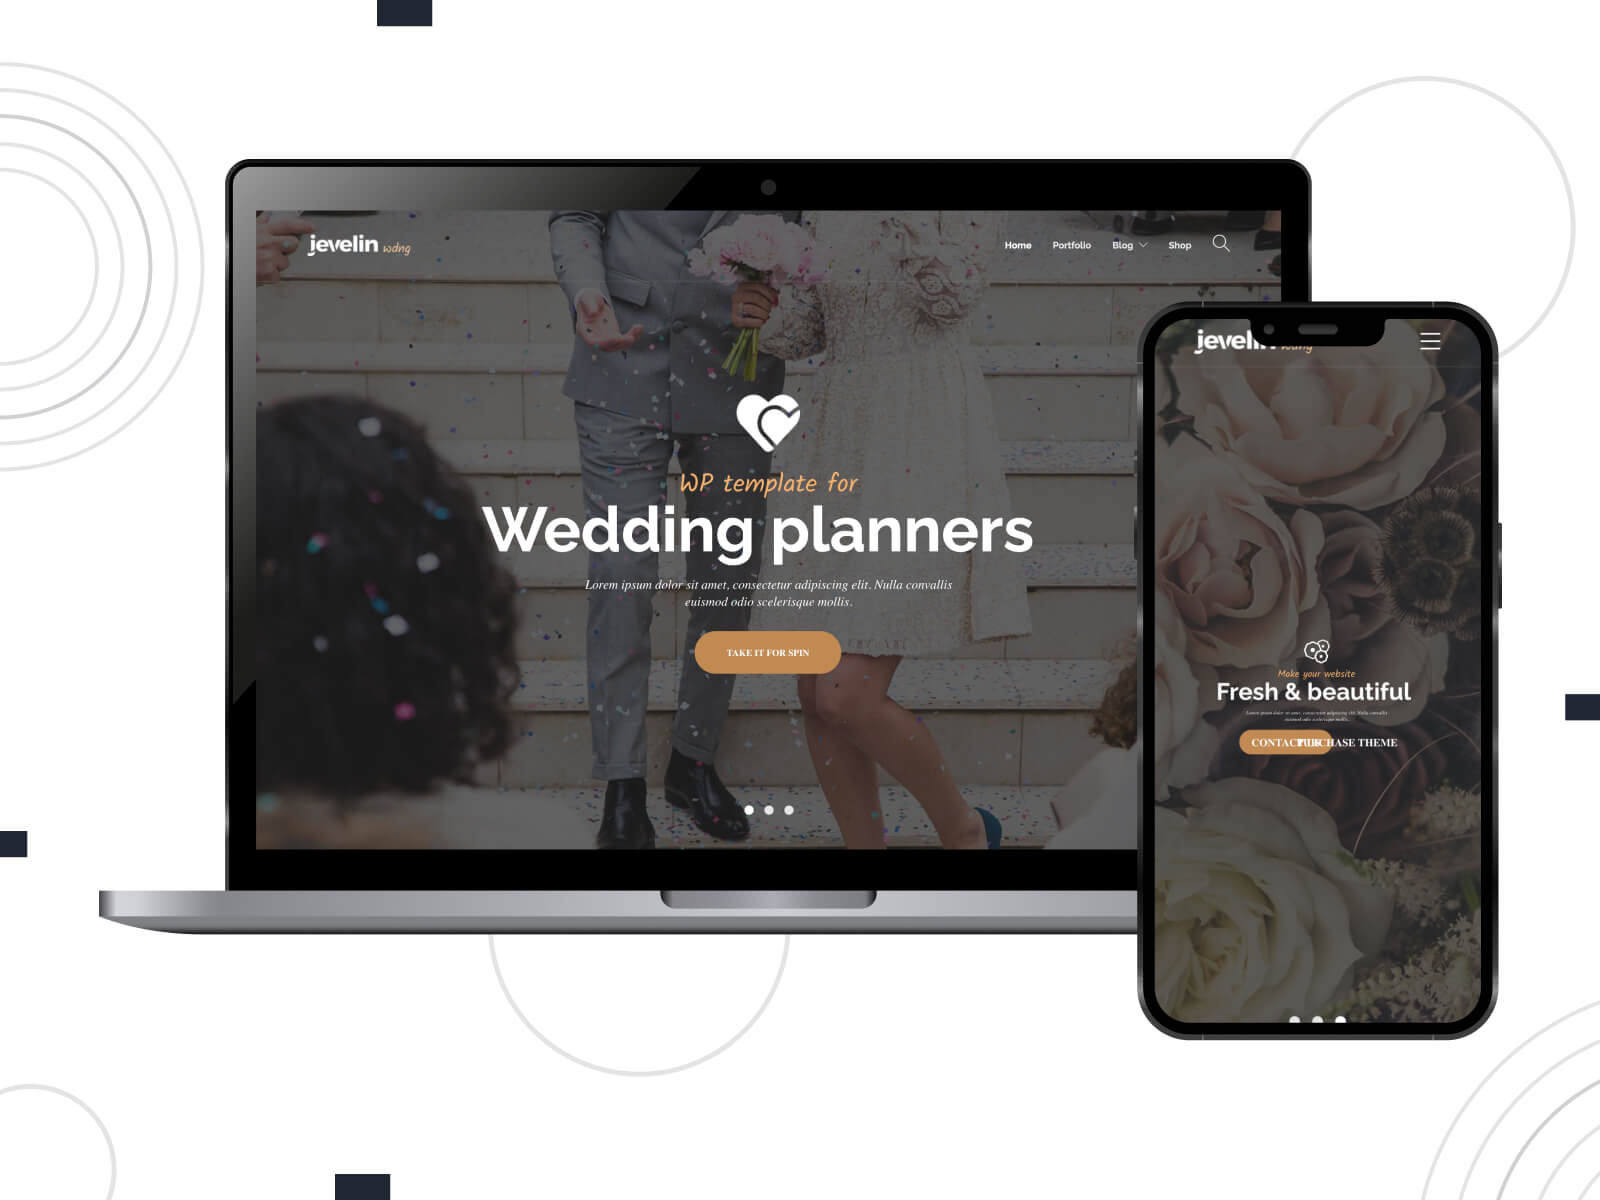 Screenshot of Jevelin - dim, inviting, professional WordPress themes designed for wedding planners and coordinators in color range.